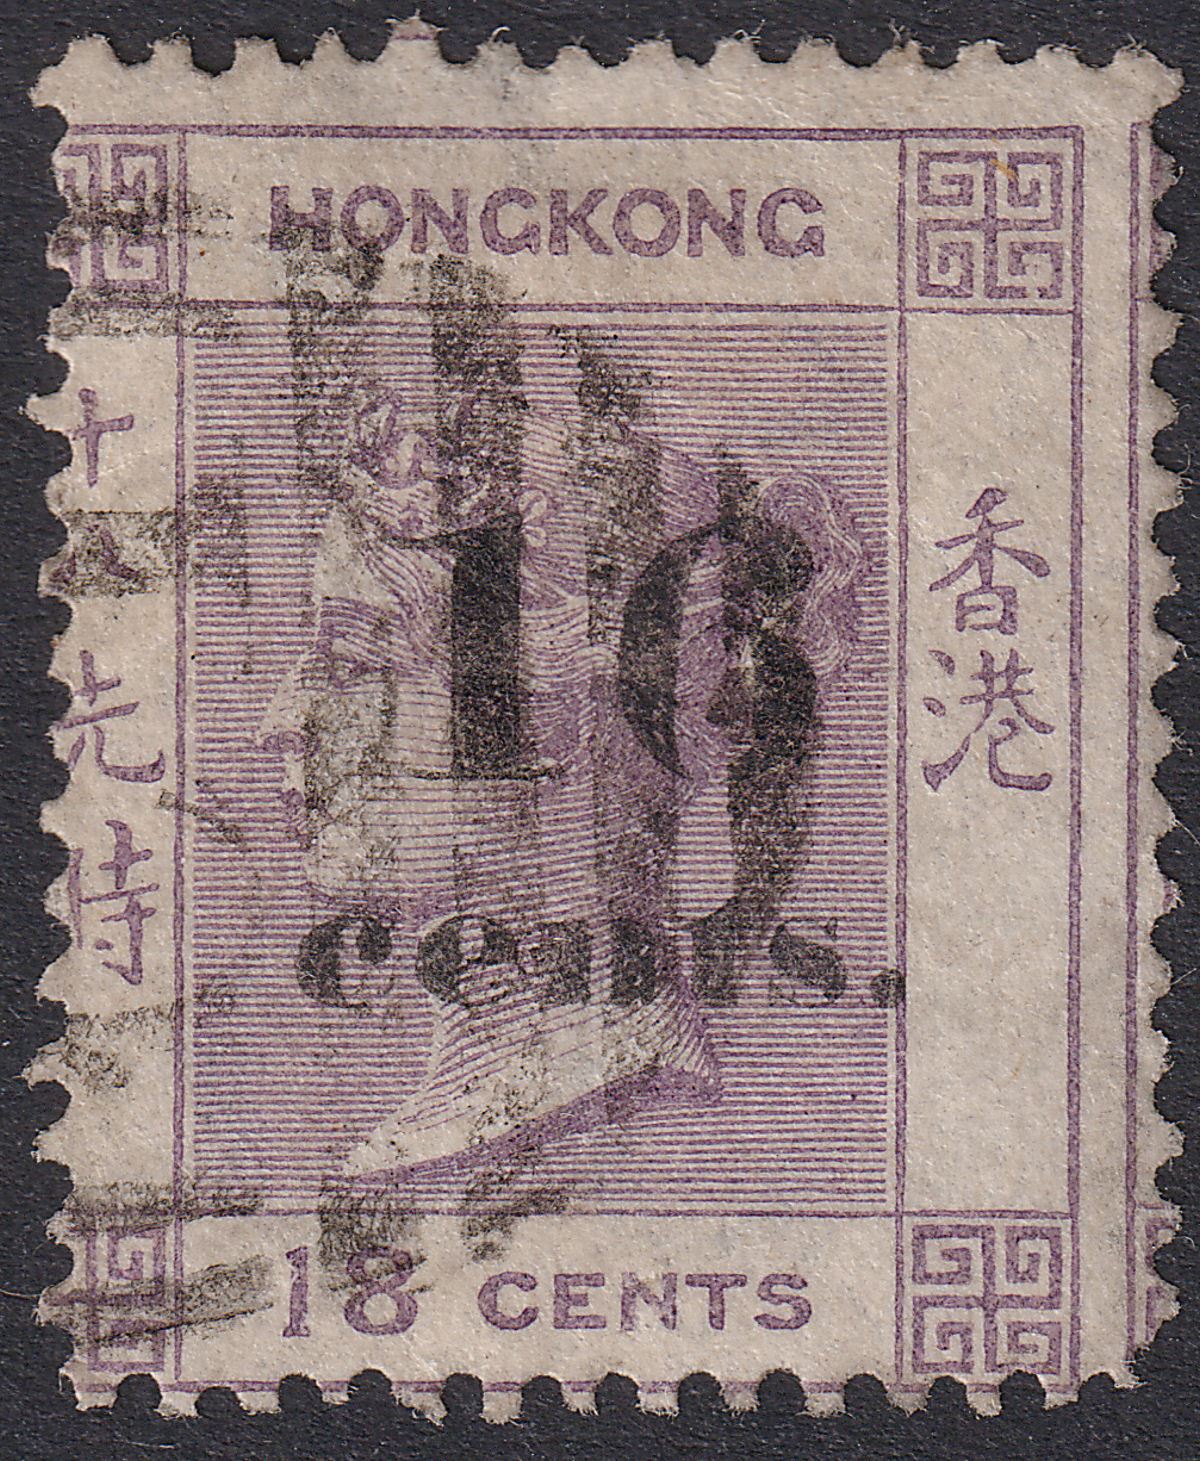 Hong Kong 1877 QV 16c Surch on 18c Used w C1 Canton Postmark SG Z148 cat £300